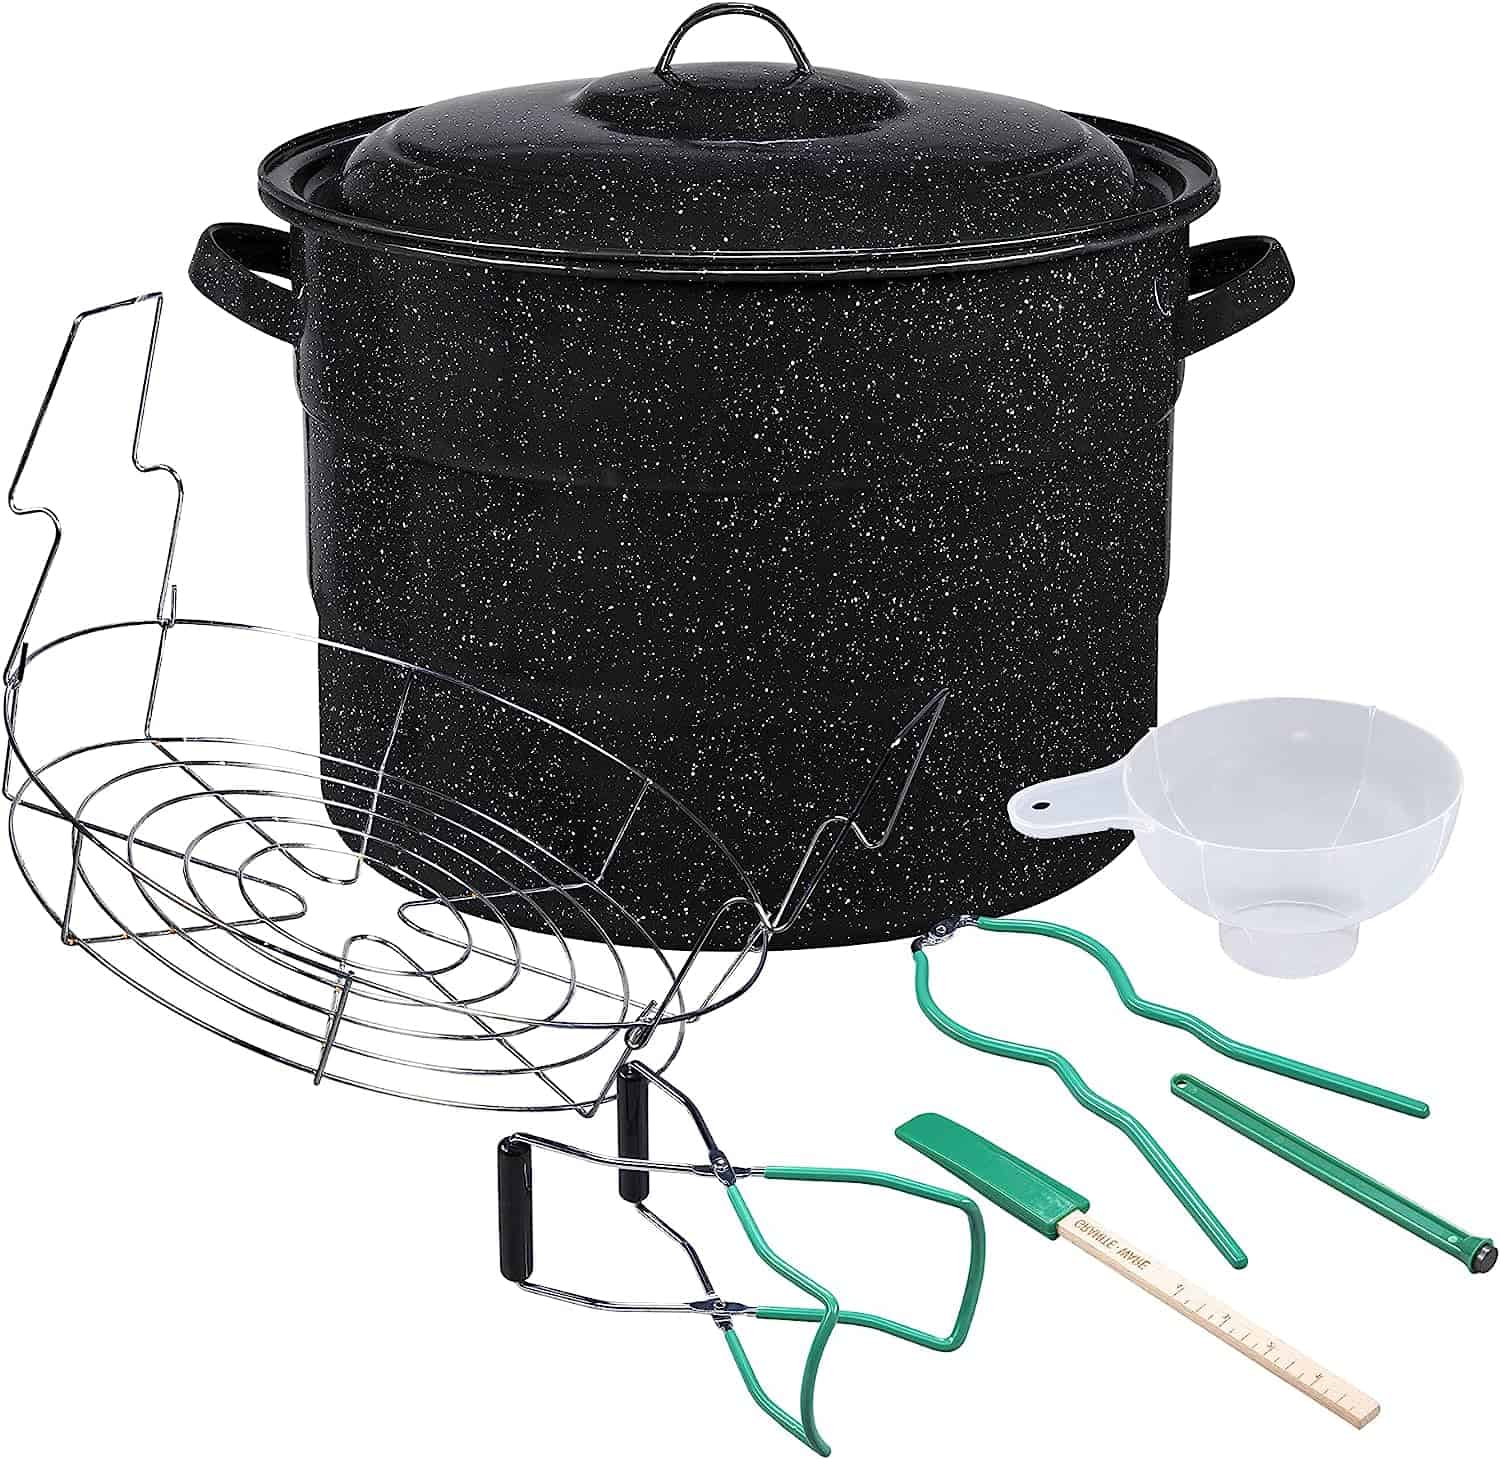 Granite Ware 8 Piece Enamelware Water bath Canning Pot (Speckled Black) with Canning Toolset and Rack. Canning Supplies Starter Kit, Canning Supplies. Canning Kit